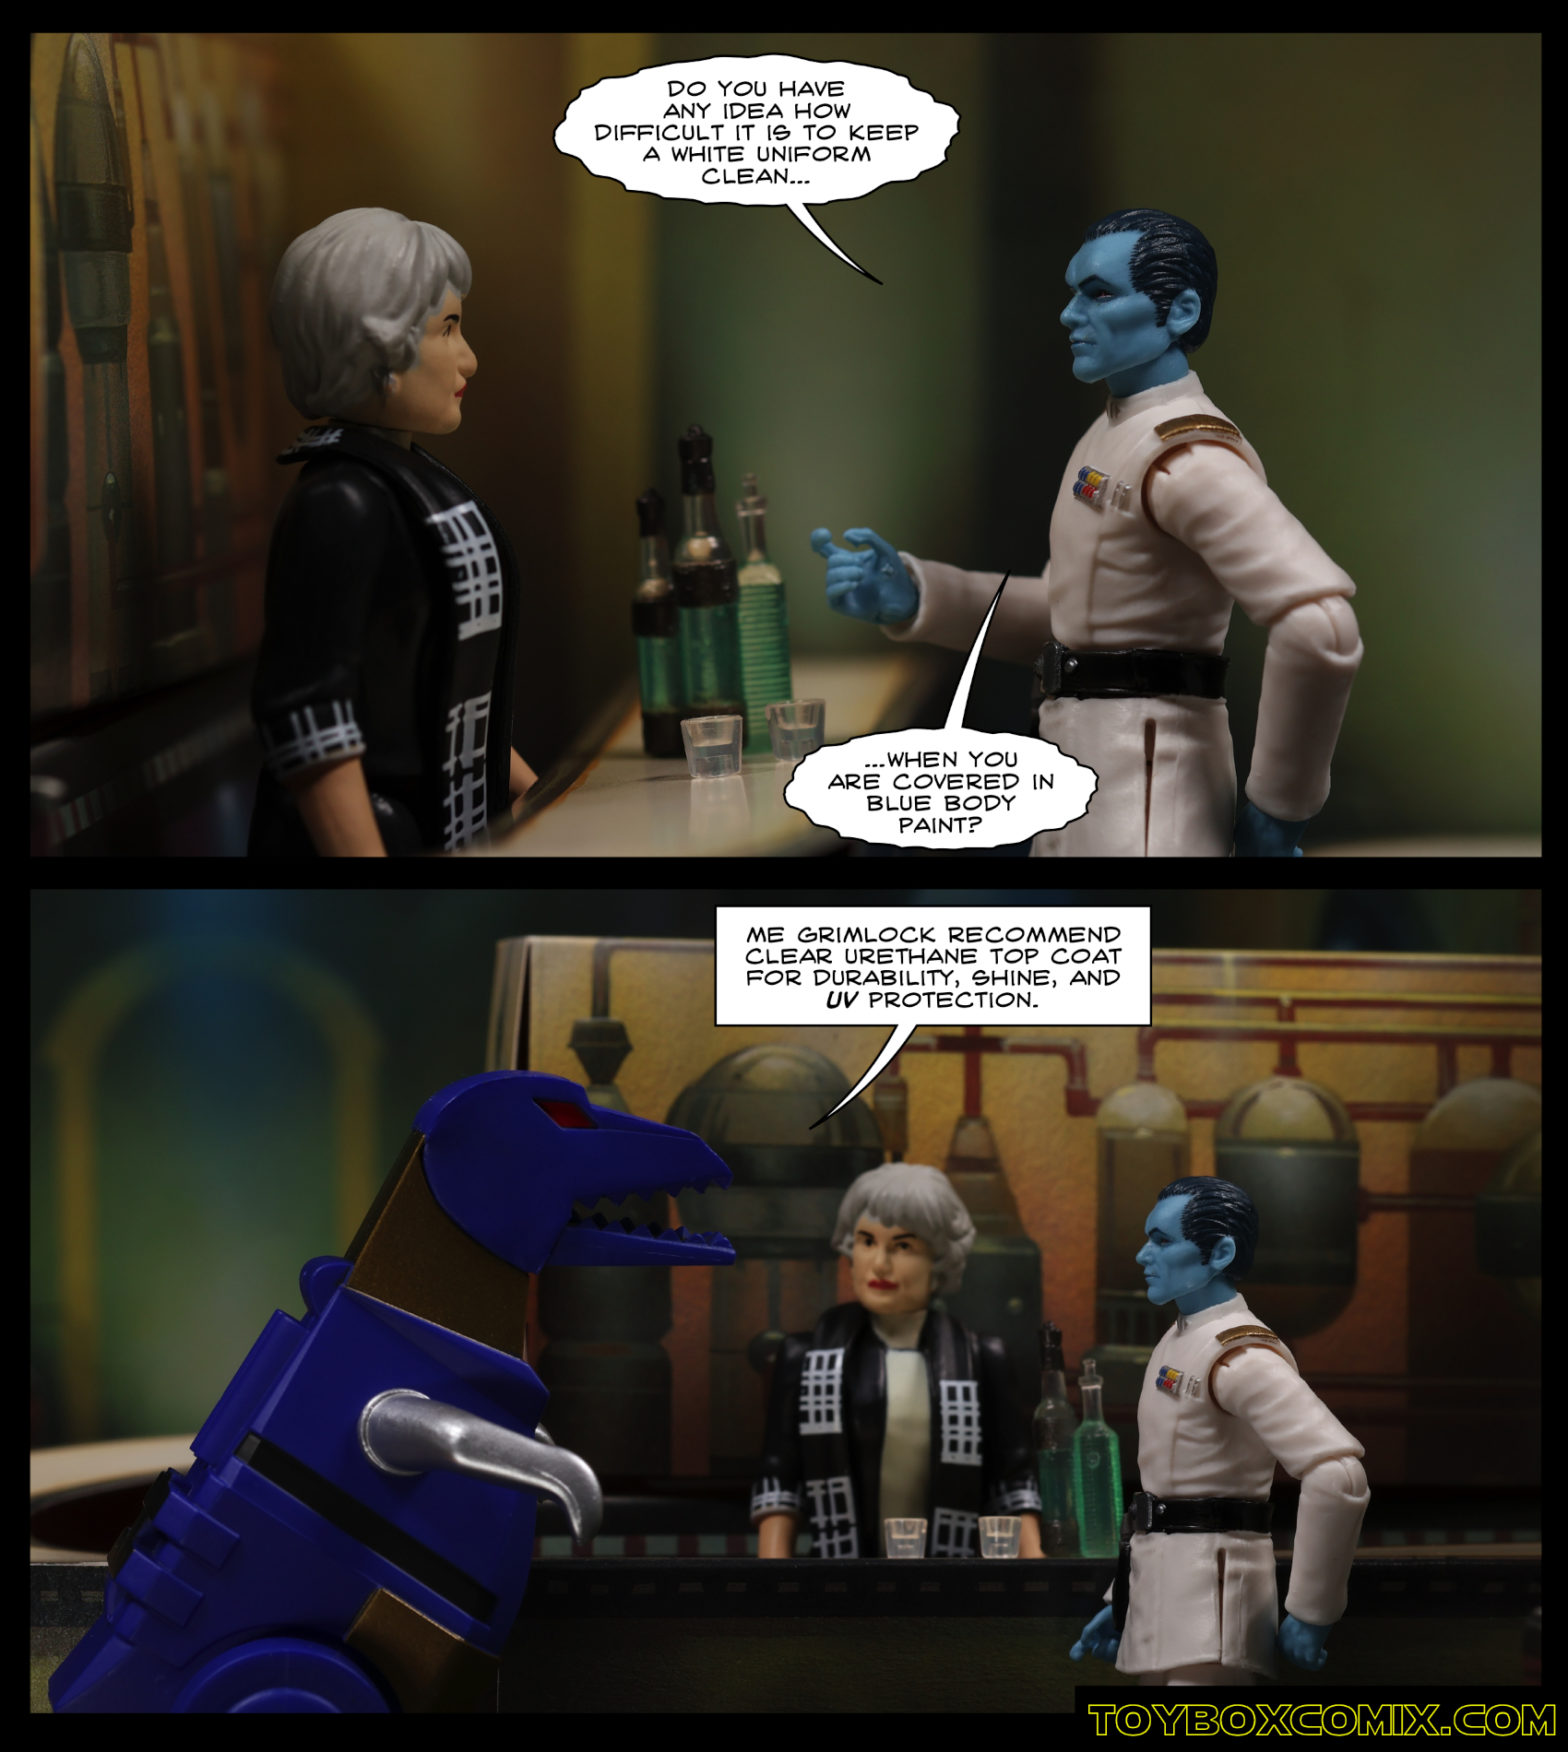 Location: Mos Eisley Cantina. Panel 1: Grand Admiral Thrawn, drunkenly, to Dorothy Zbornak: “Do you have any idea how difficult it is to keep a white uniform clean when you’re covered in blue body paint?” 2: Grimlock (G2 blue dino mode) to Thrawn: “Me Grimlock recommend clear urethane top coat for durability, shine, and UV protection.”